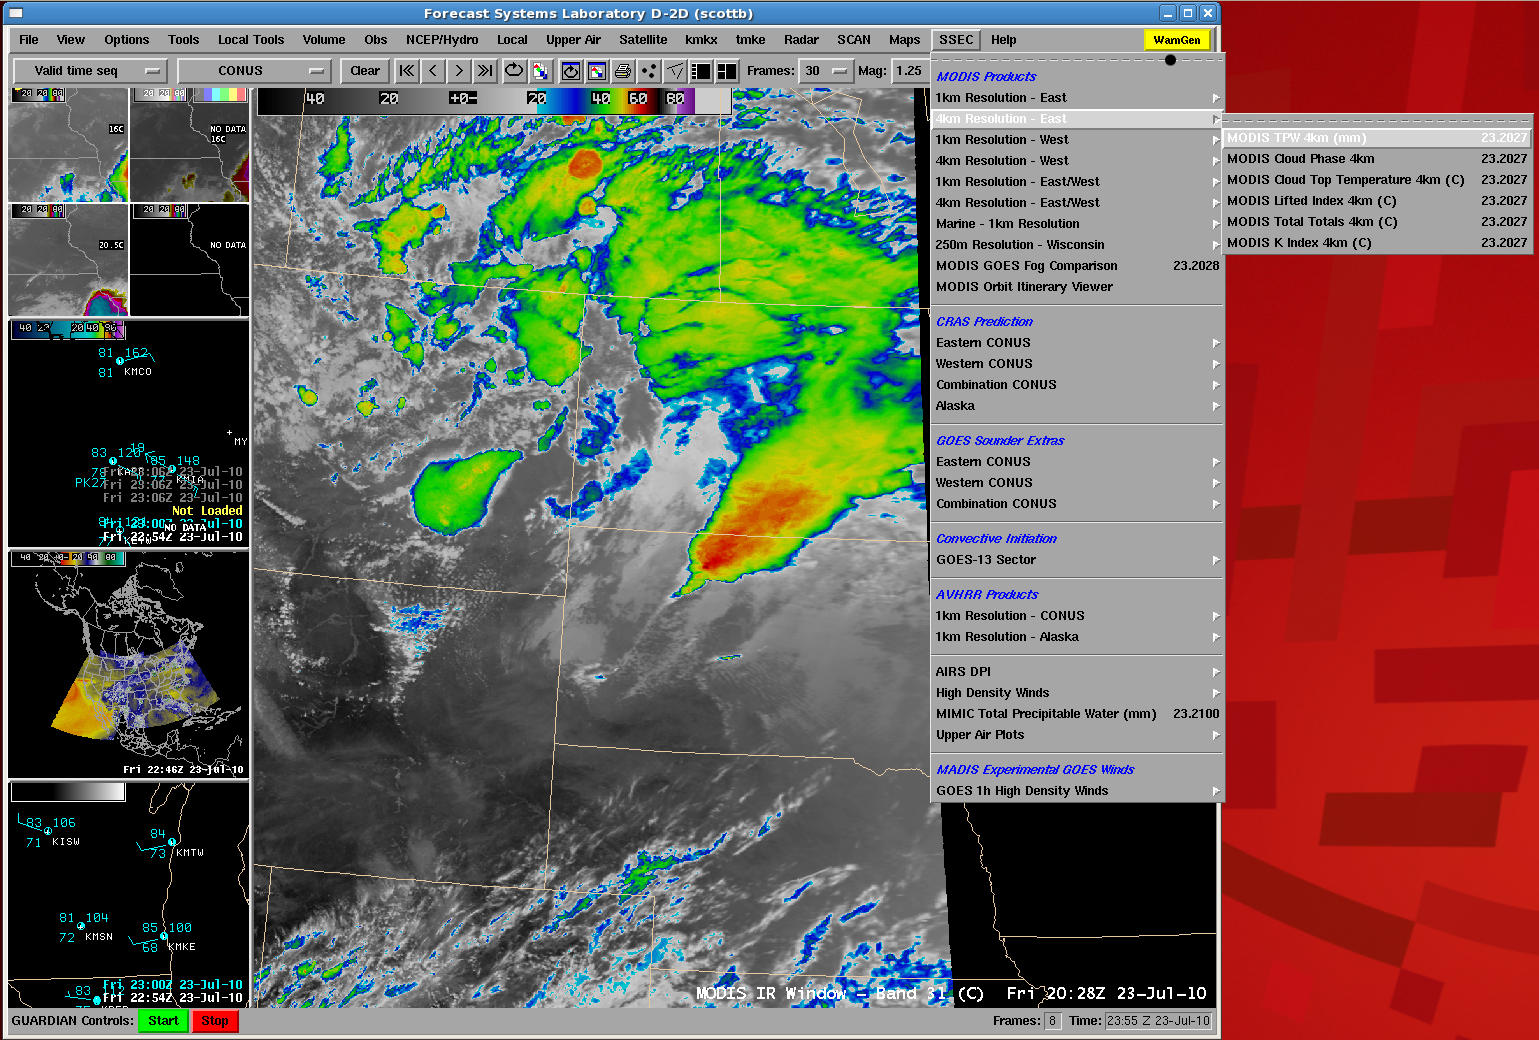 AWIPS menu of 4-km resolution MODIS products from CIMSS